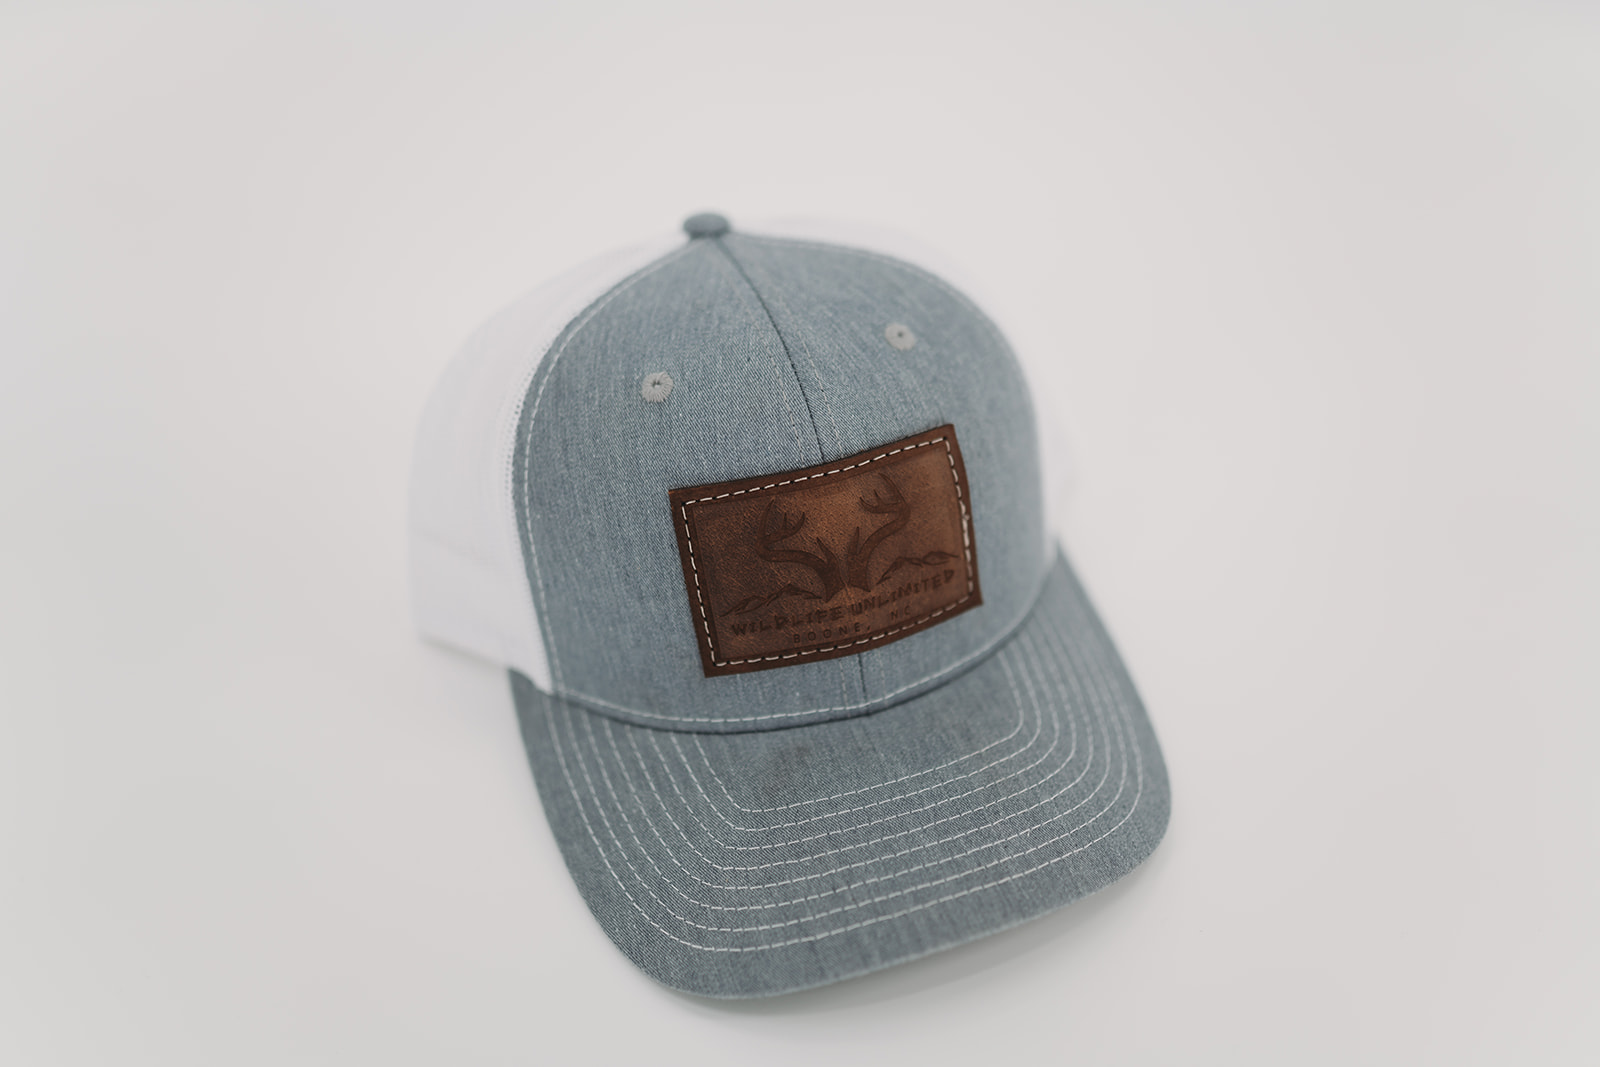 Wildlife Unlimited Leather Patch Trucker Hat